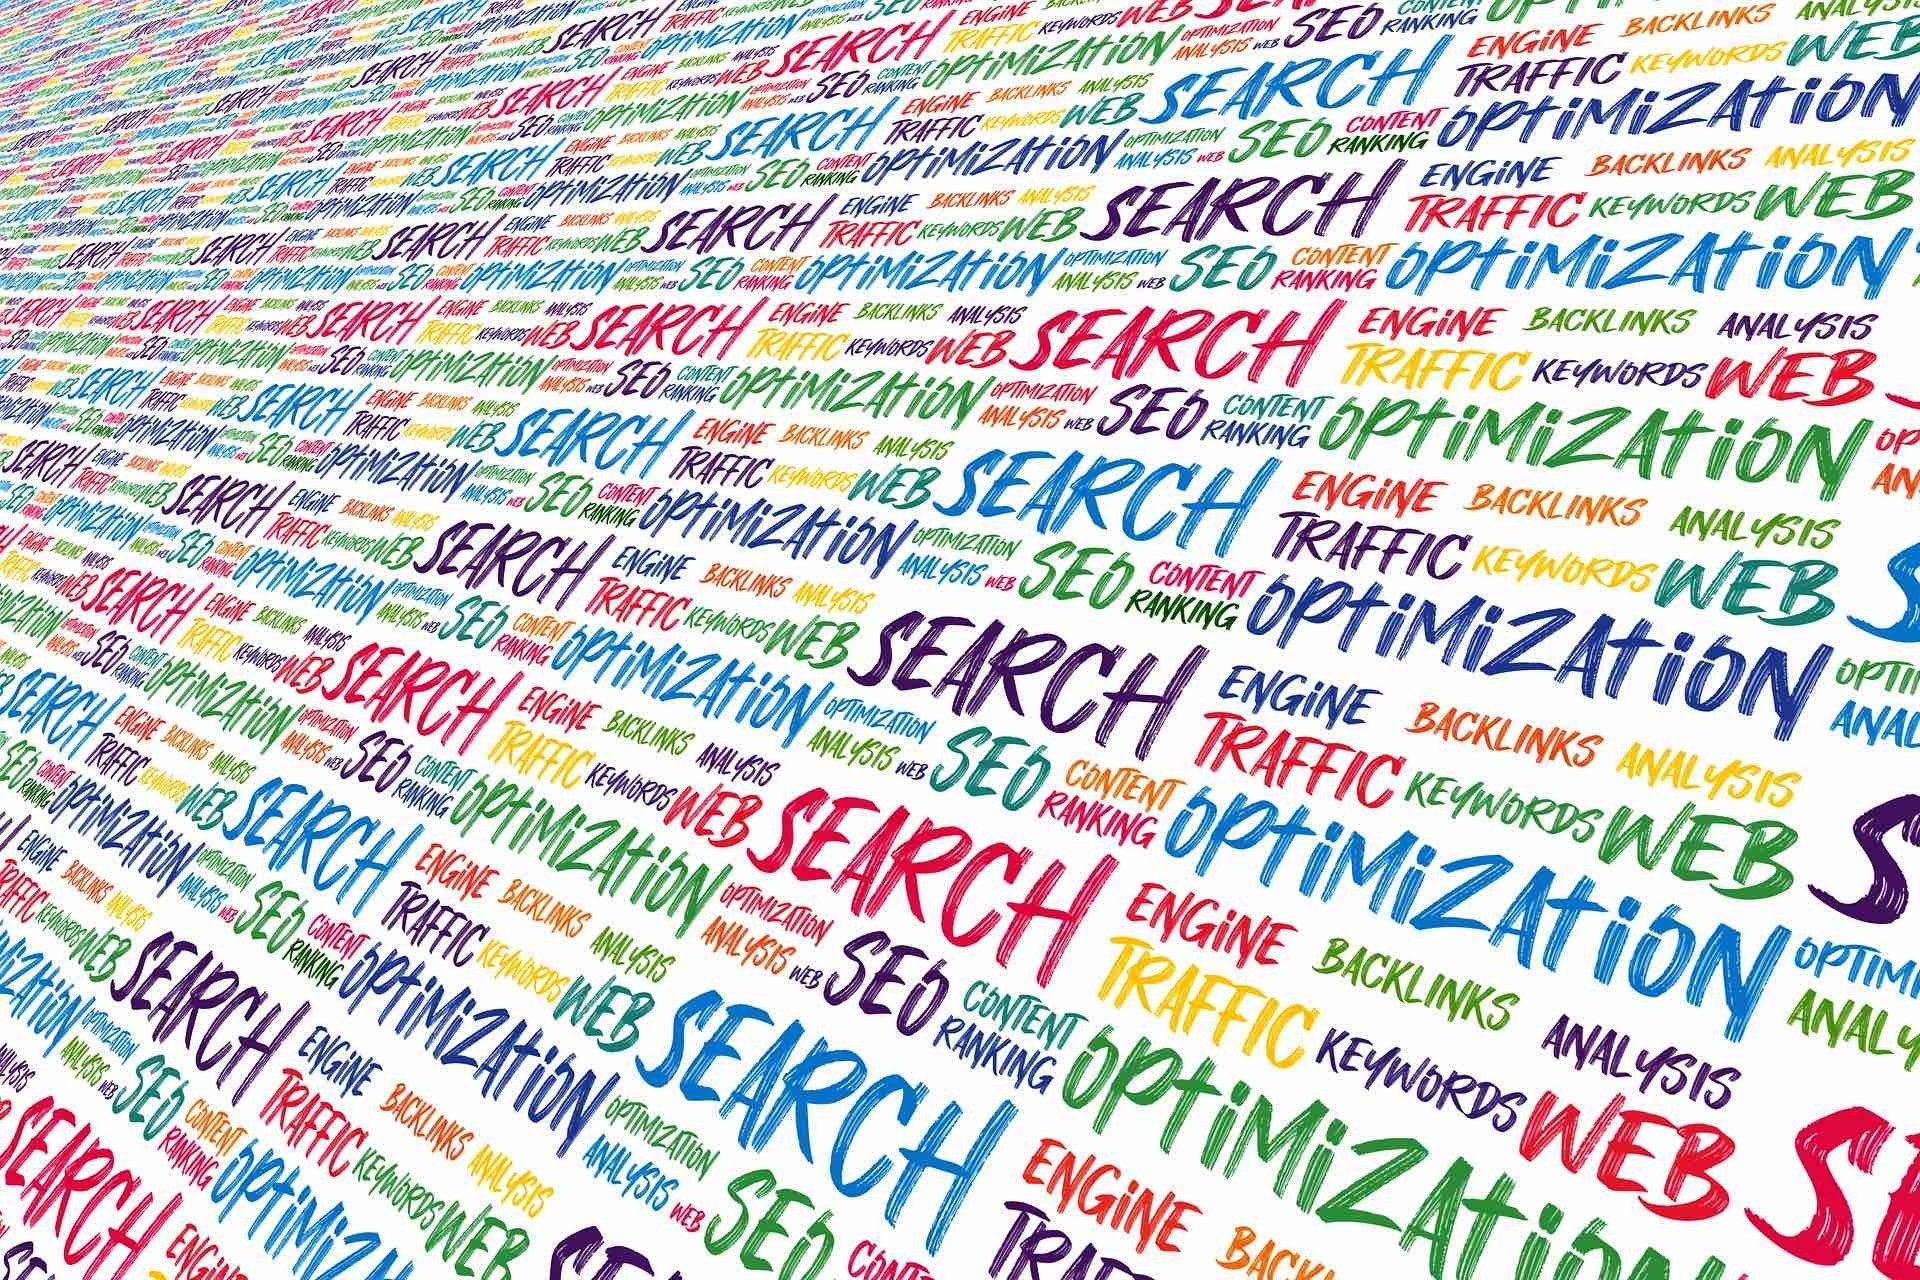 Keyword research and SEO wordmap